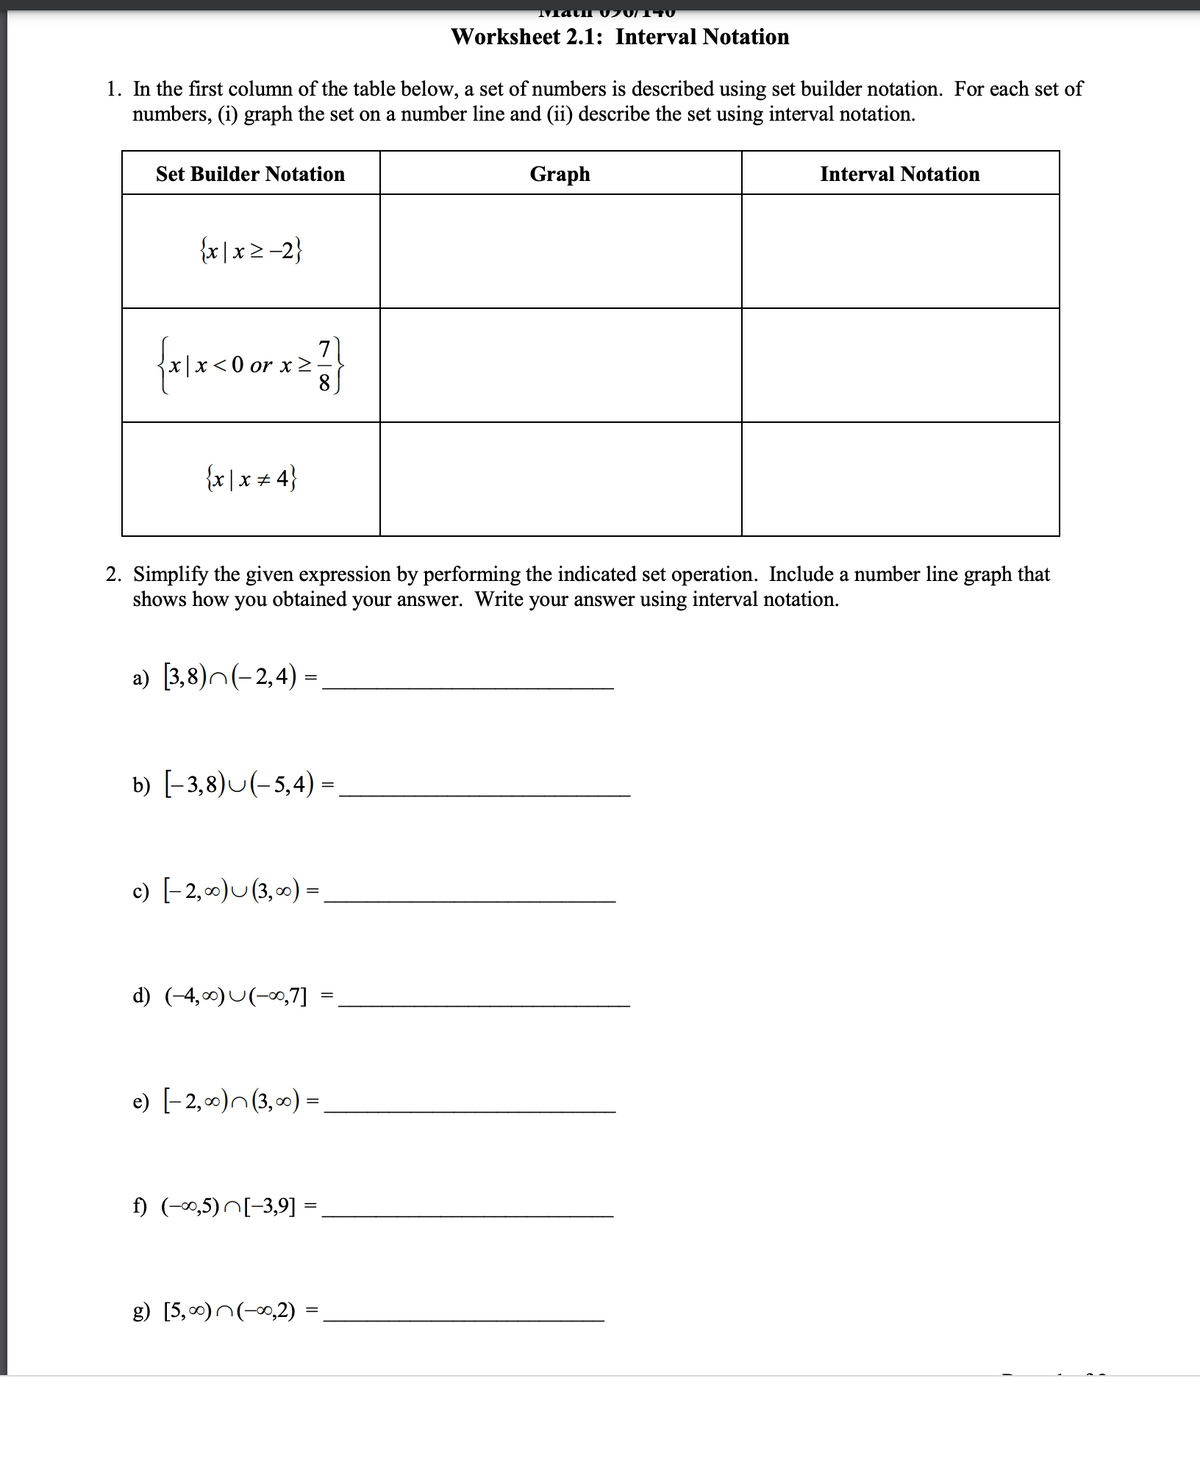 MMath U701U
Worksheet 2.1: Interval Notation
1. In the first column of the table below, a set of numbers is described using set builder notation. For each set of
numbers, (i) graph the set on a number line and (ii) describe the set using interval notation.
Set BuilderNotation
Graph
Interval Notation
{x |x2 -2}
0 or x >
8
{x |x + 4}
2. Simplify the given expression by performing the indicated set operation. Include a number line graph that
shows how you obtained your answer. Write your answer using interval notation.
a) [3,8)n(-2,4) =
b) [-3,8)U(-5,4) =
c) [-2, 00)U (3, 0) =
d) (-4,0) U(-x,7]
e) [-2, 00)n(3, 0) =
f) (-0,5)N[-3,9] =
g) [5,0)n(-0,2)
